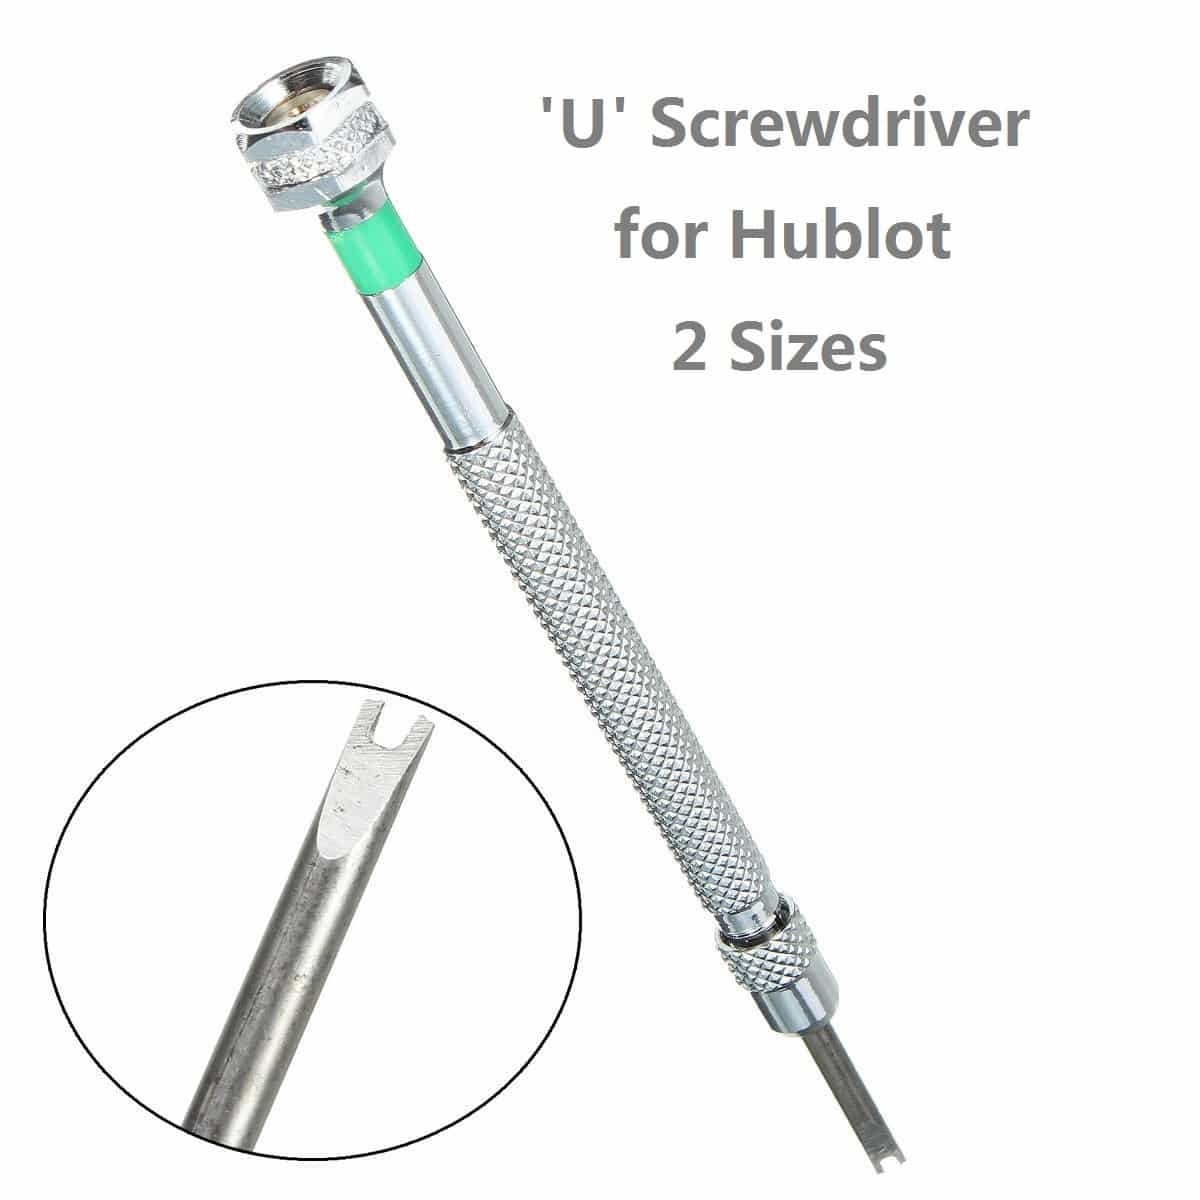 Hublot watch screwdriver tool special 'U' style for sale low price